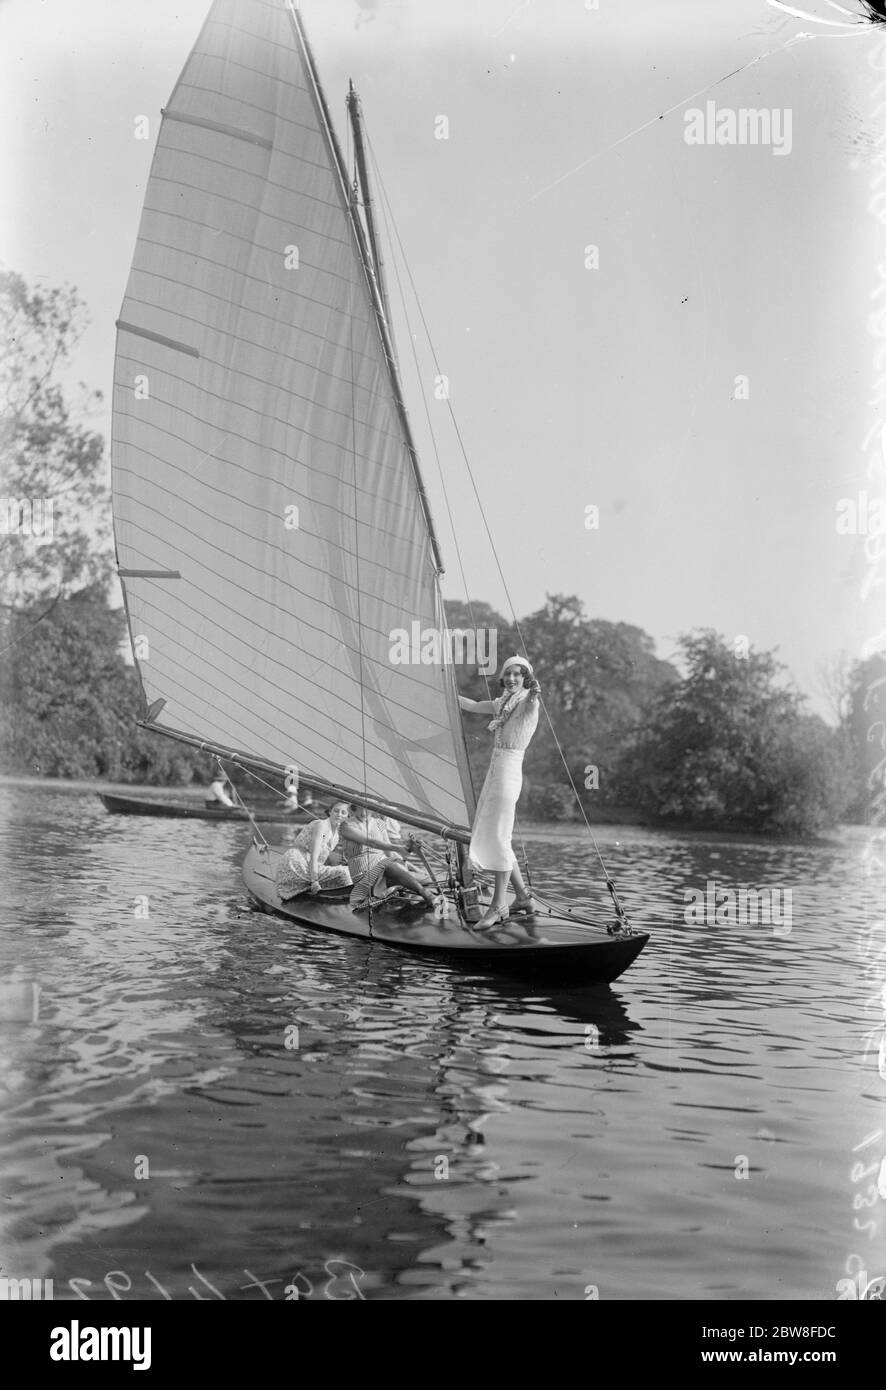 Sailing thrills in the Heart of London . Small sailing yachts have just been installed to add to the pleasures of Londoners on the lake , with its picturesque surroundings , in Regents Park . One of the yachts heeling over in a delightfully welcome breeze during the wave . 18 August 1932 Stock Photo